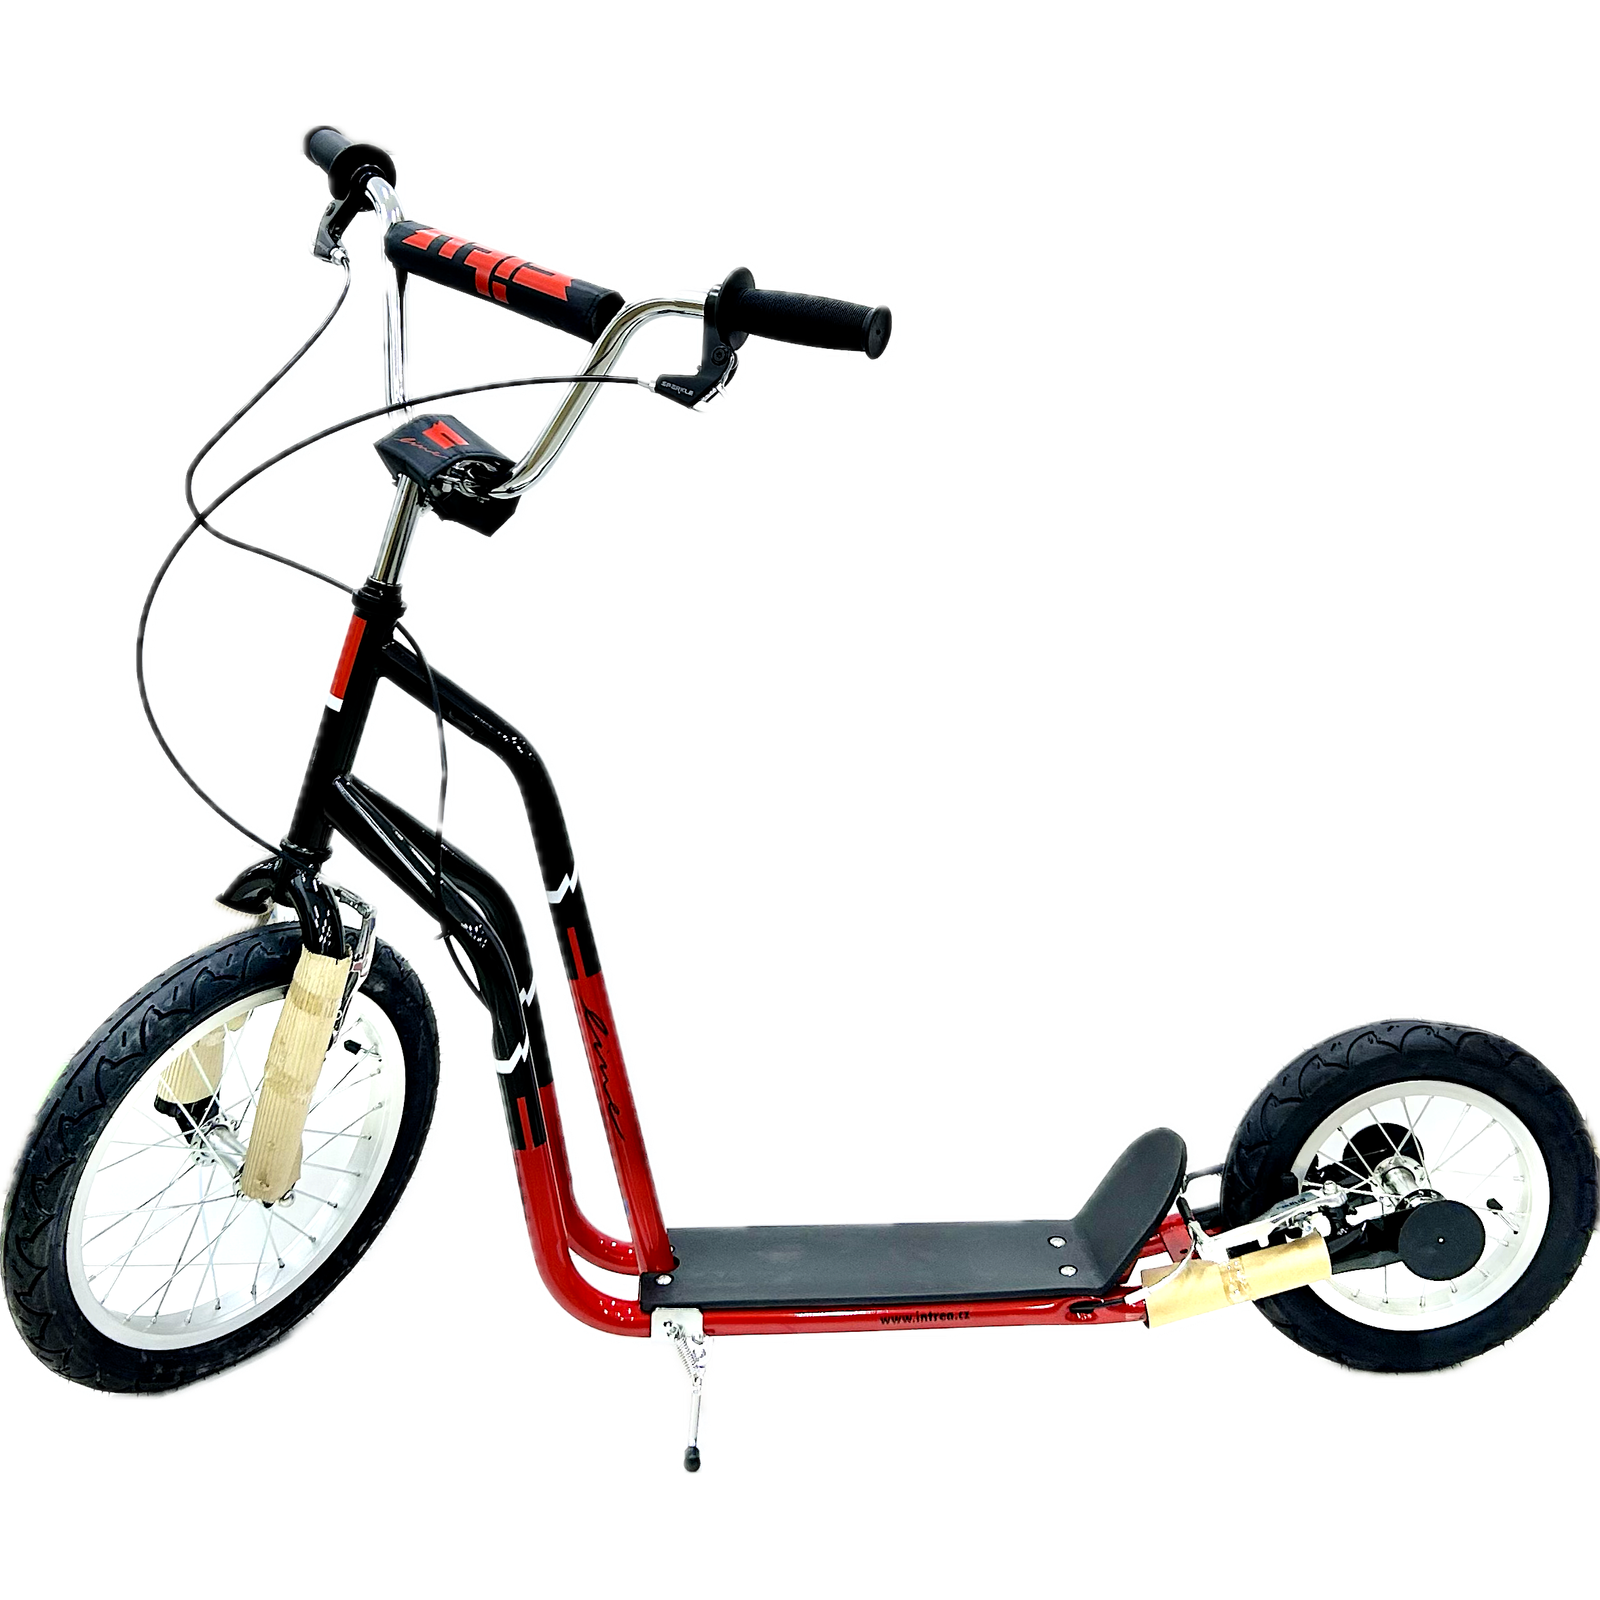 Intrea Yedoo Yvolution Tour Scooter  - Black & Red